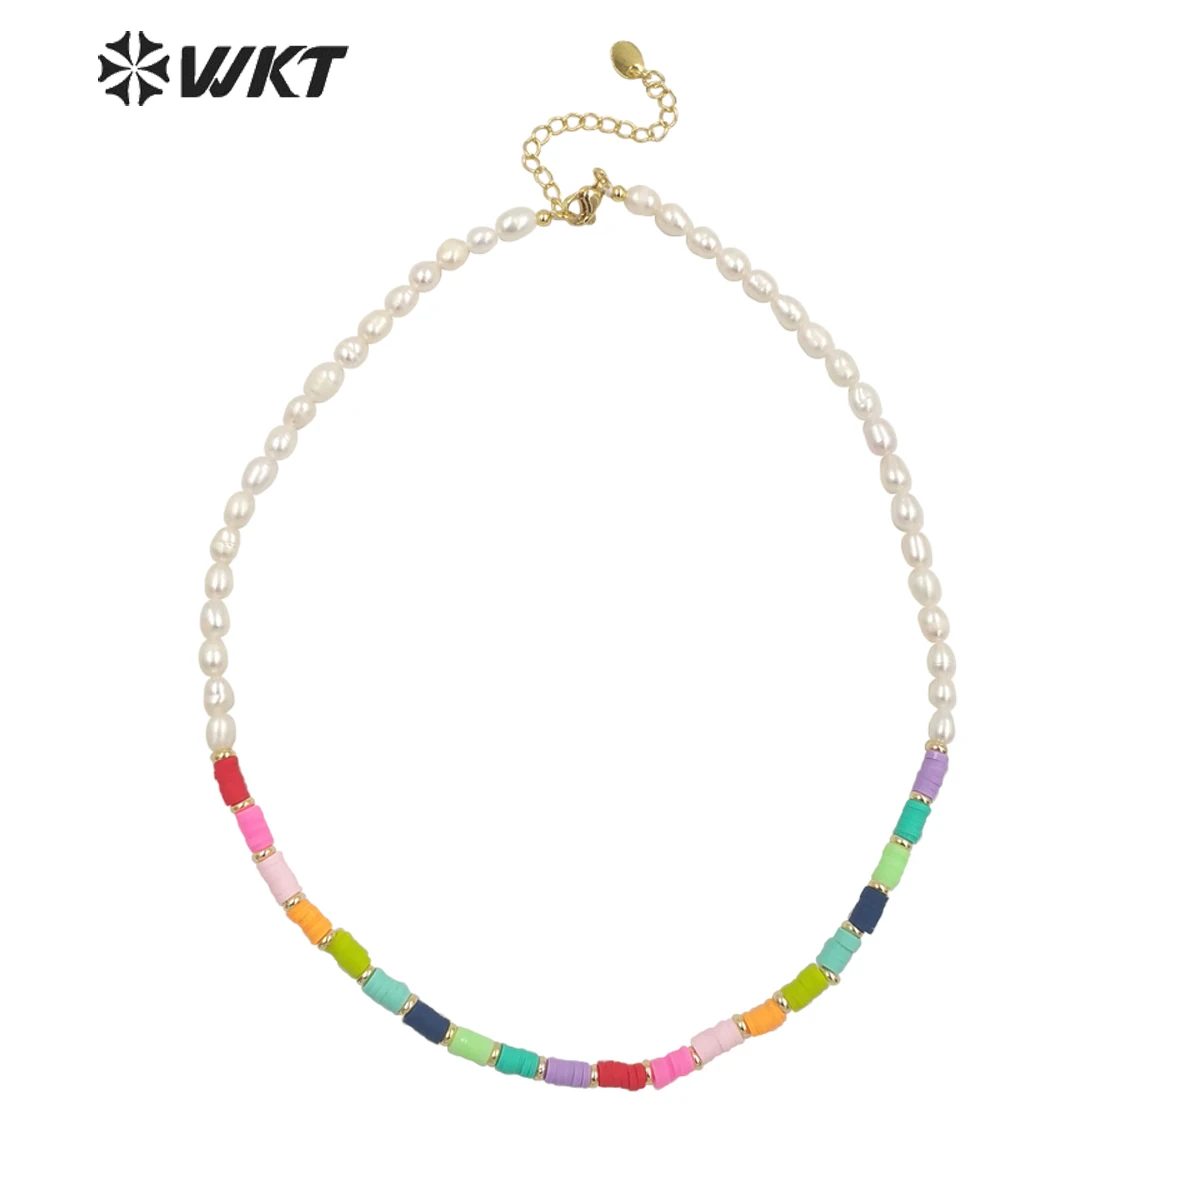 

WT-JN208 WKT New design fashion gold resin beads mix freshwater pearl necklace Daily match white pearl necklace for wedding